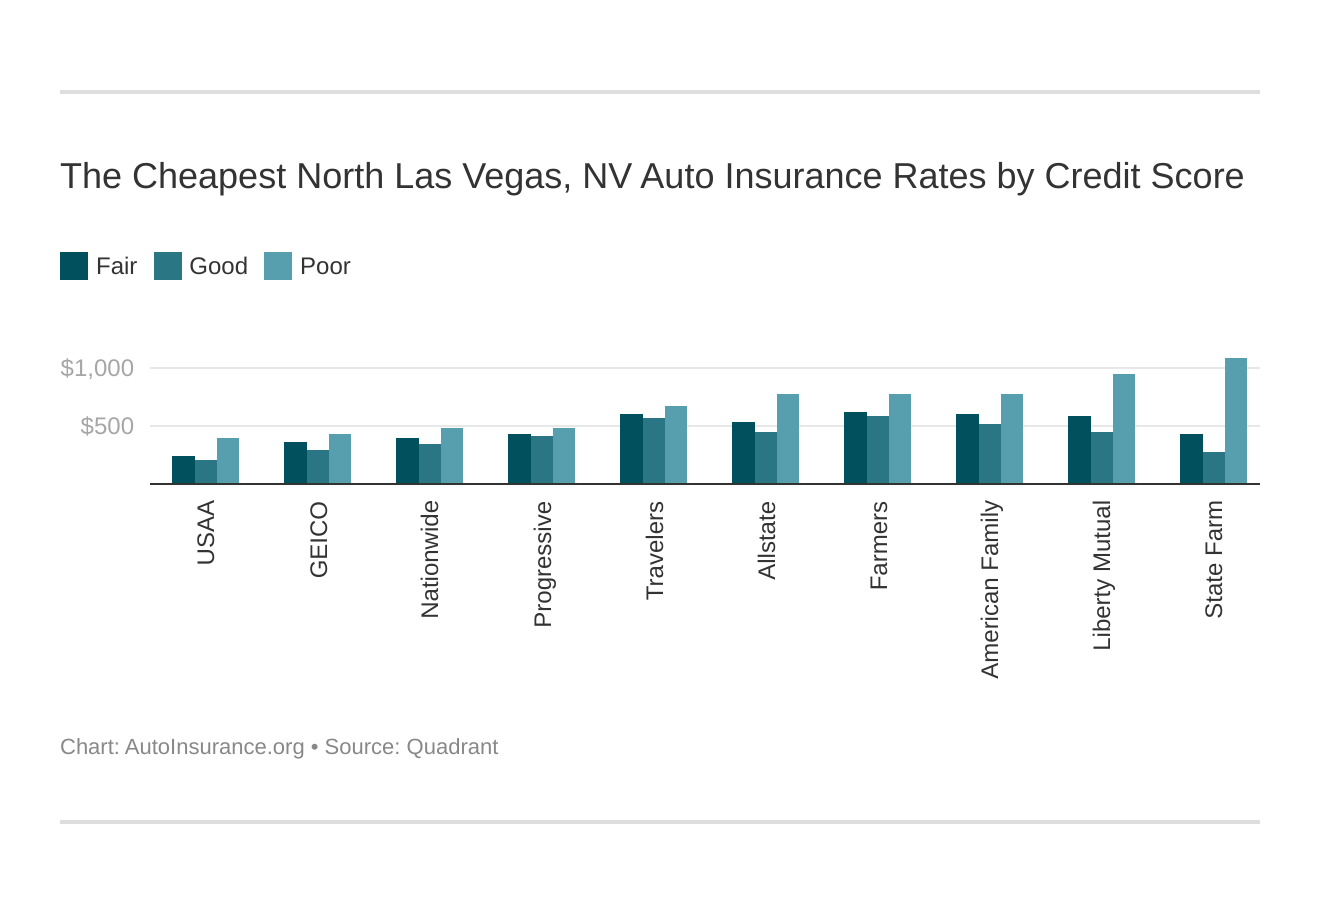 The Cheapest North Las Vegas, NV Auto Insurance Rates by Credit Score